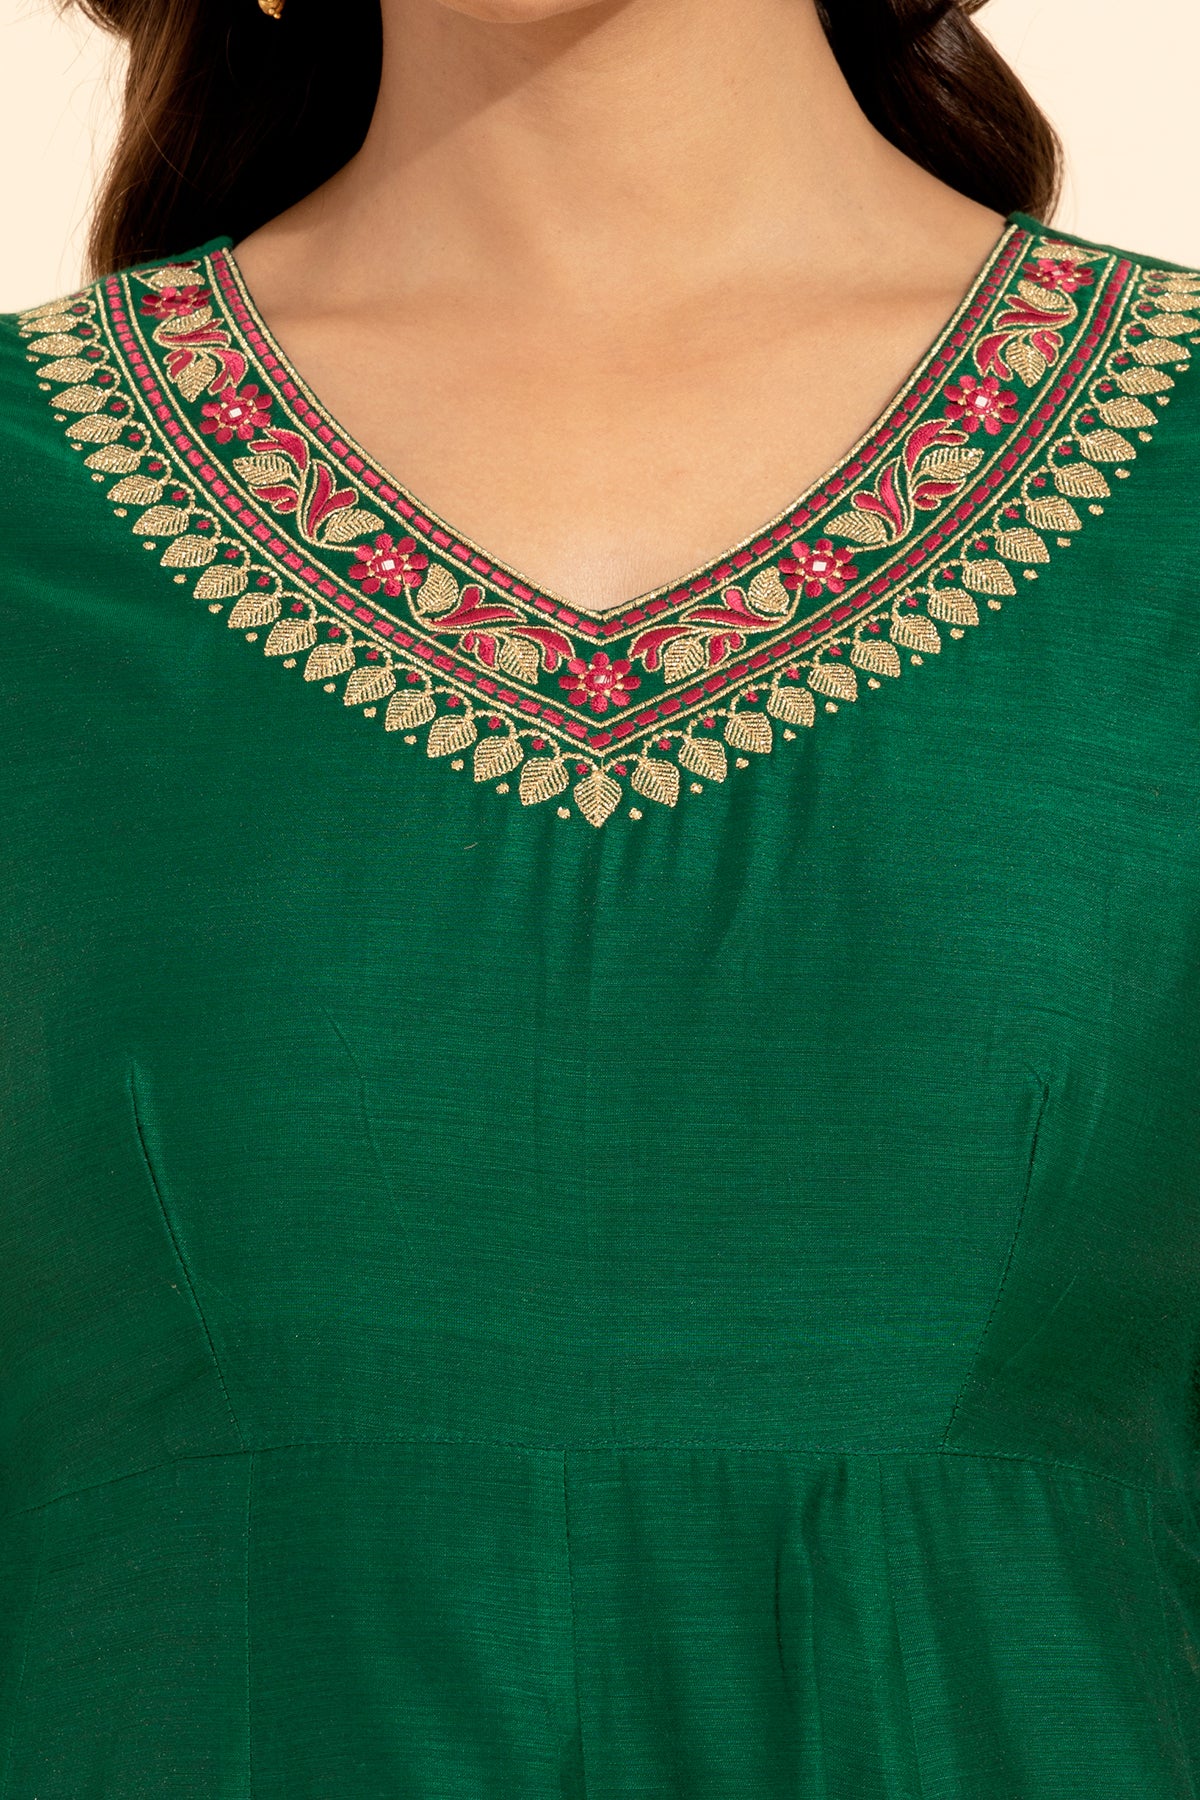 Jewel Embroidered Neckline With Floral Embroidered Border Anarkali Green